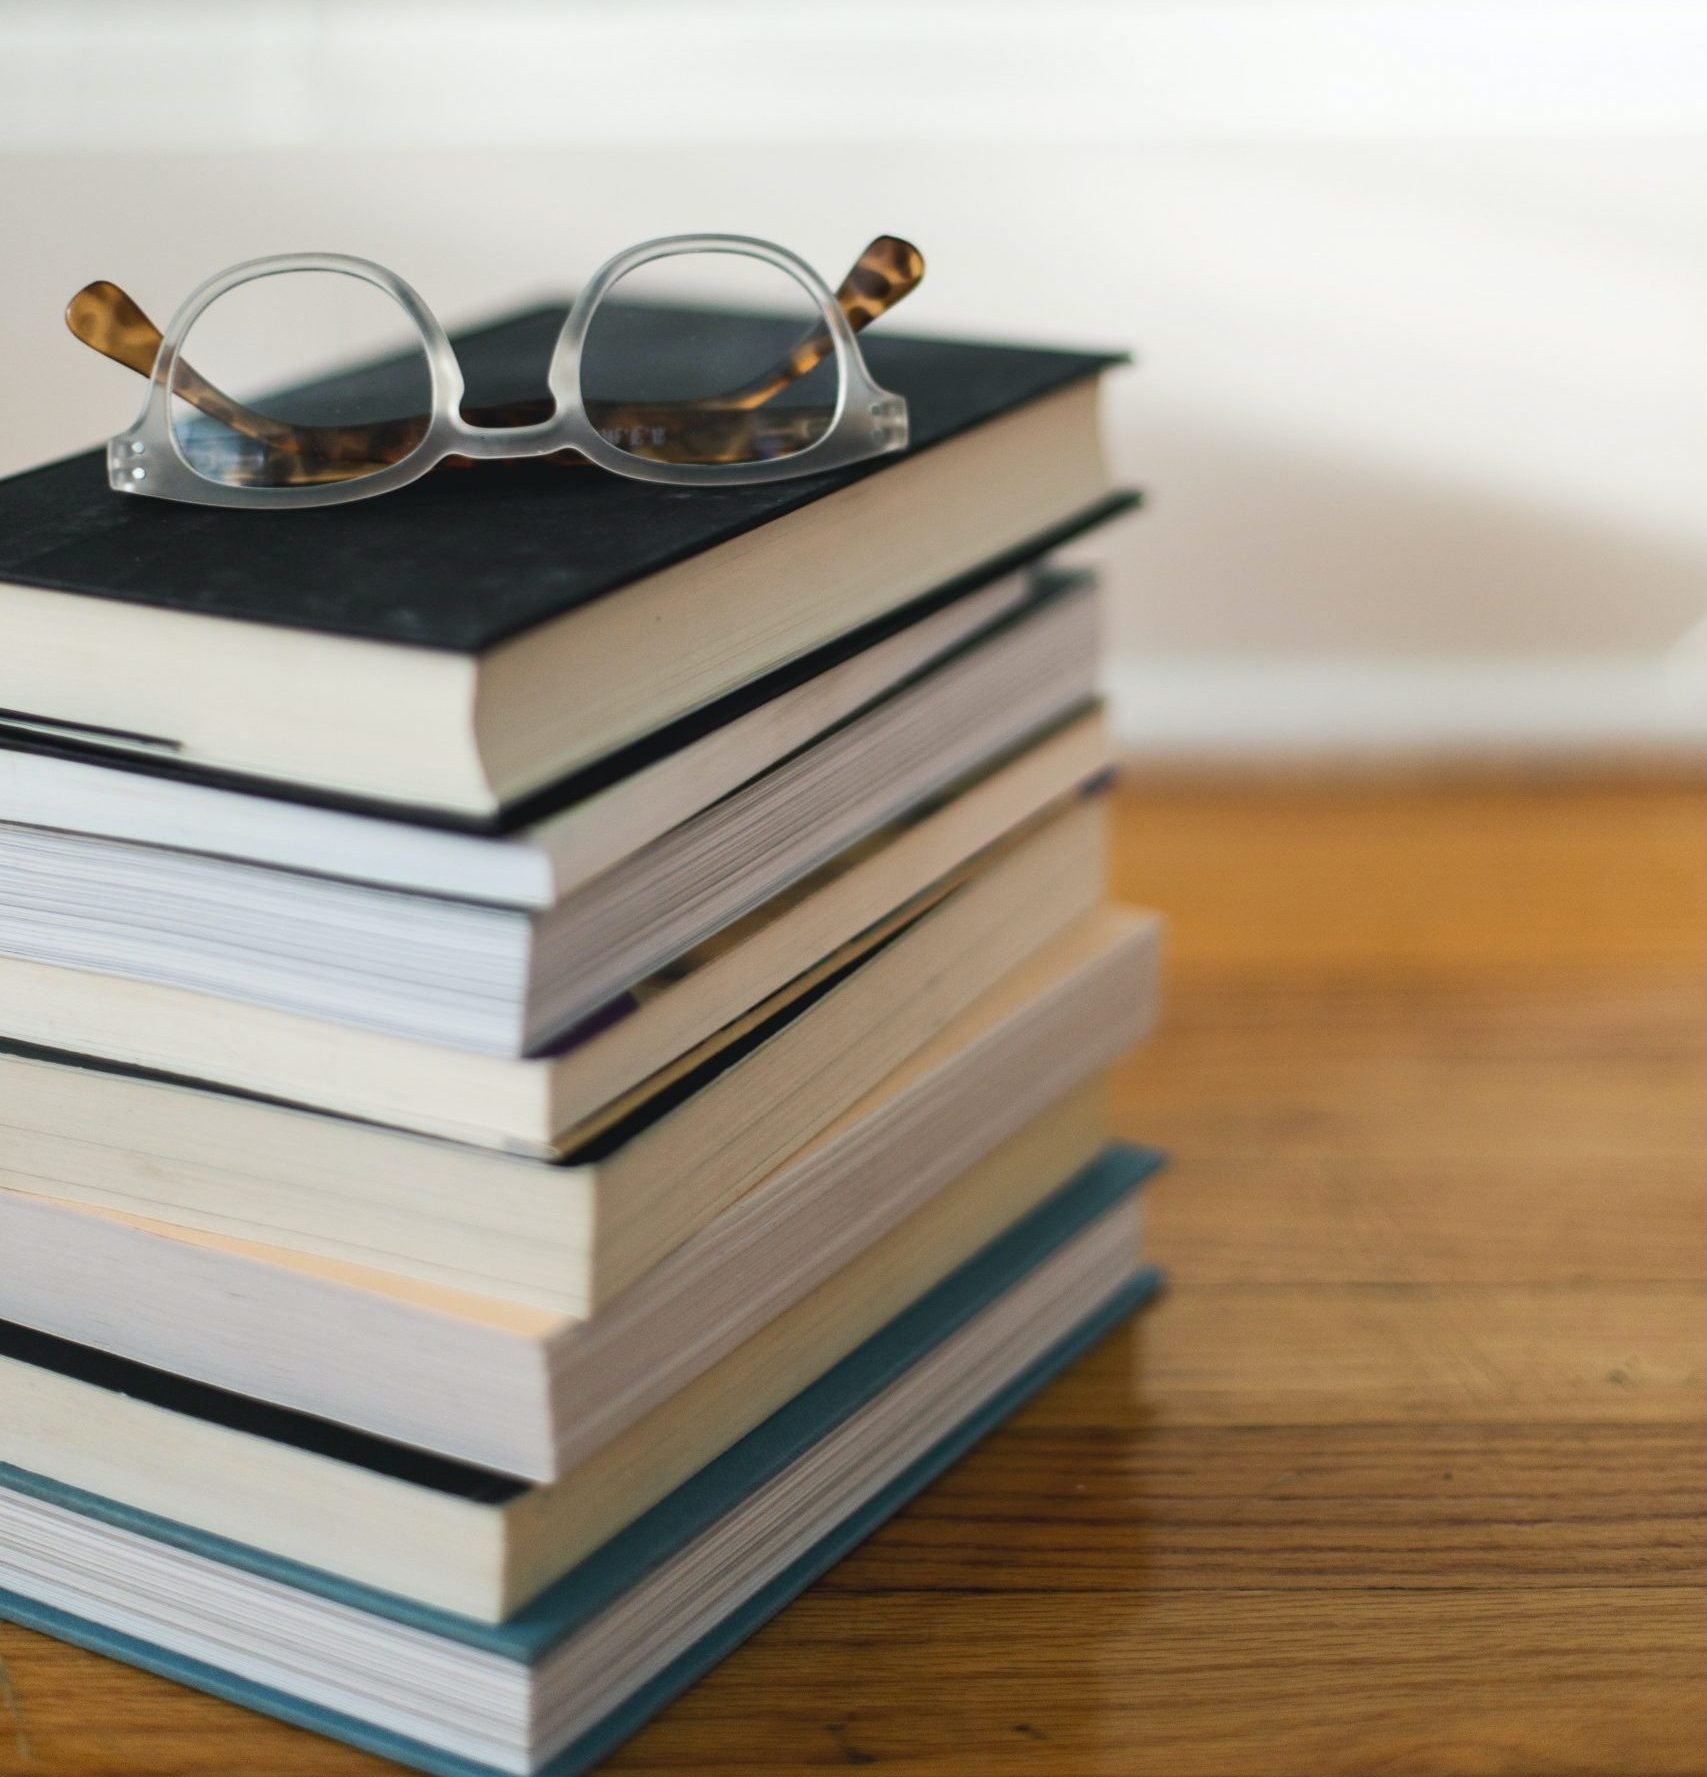 Pile of Books with glasses on top